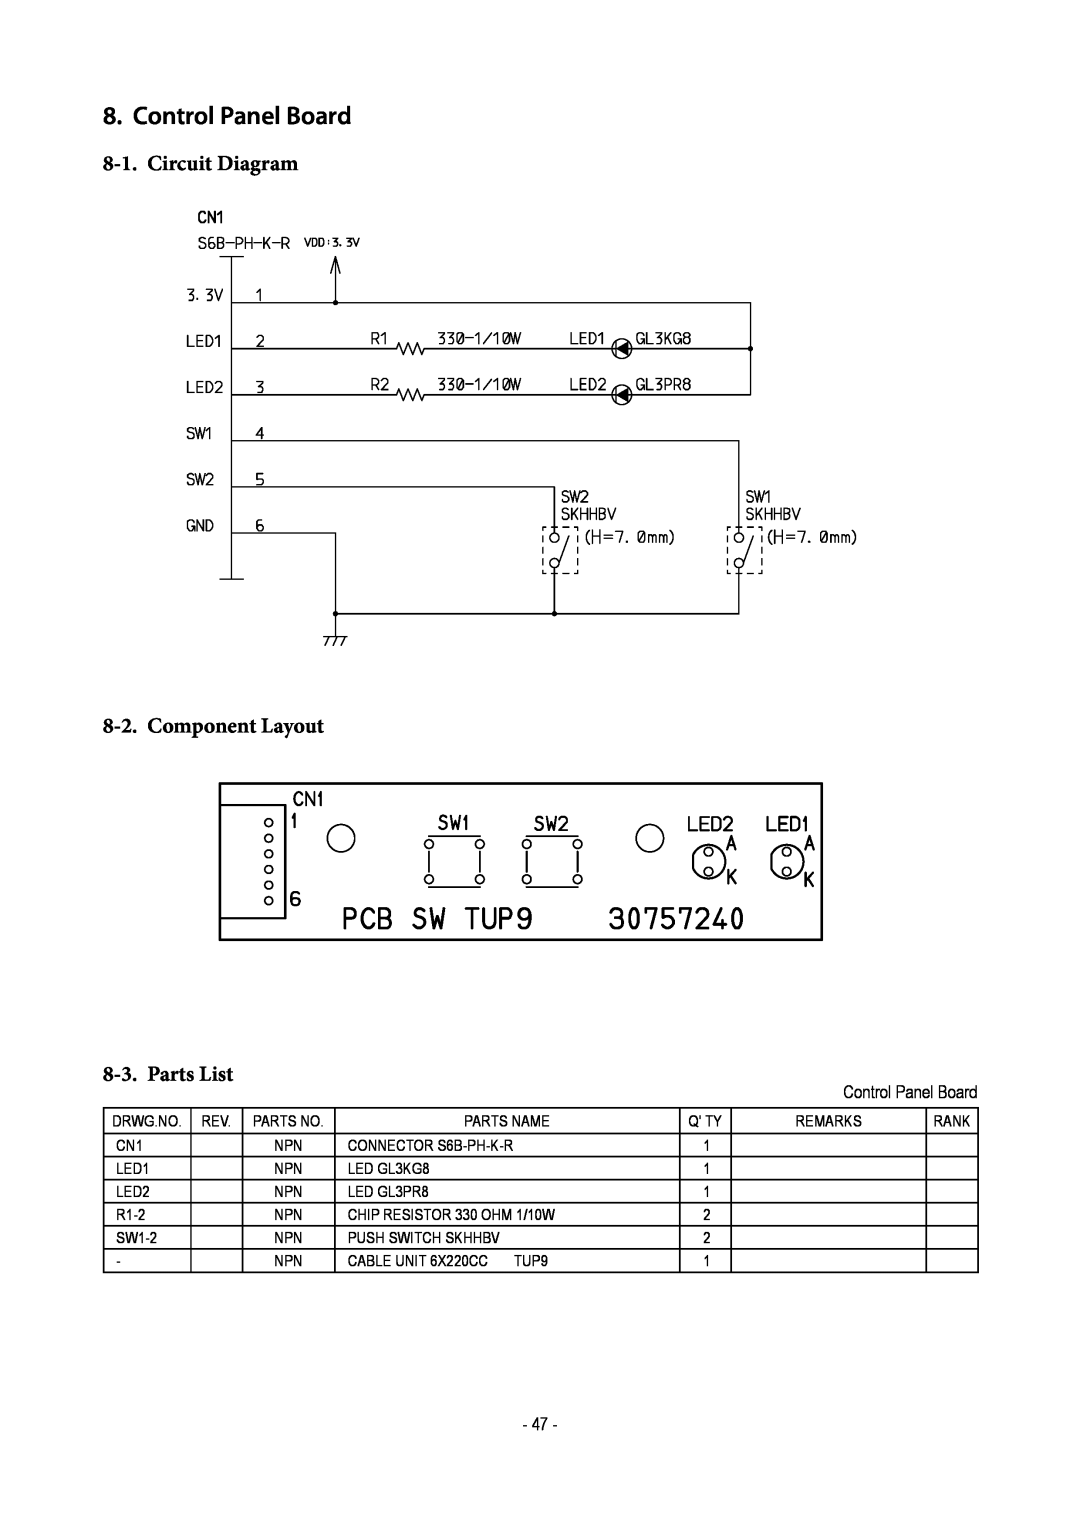 Star Micronics TUP500 technical manual Control Panel Board, Circuit Diagram, Component Layout, Parts List 